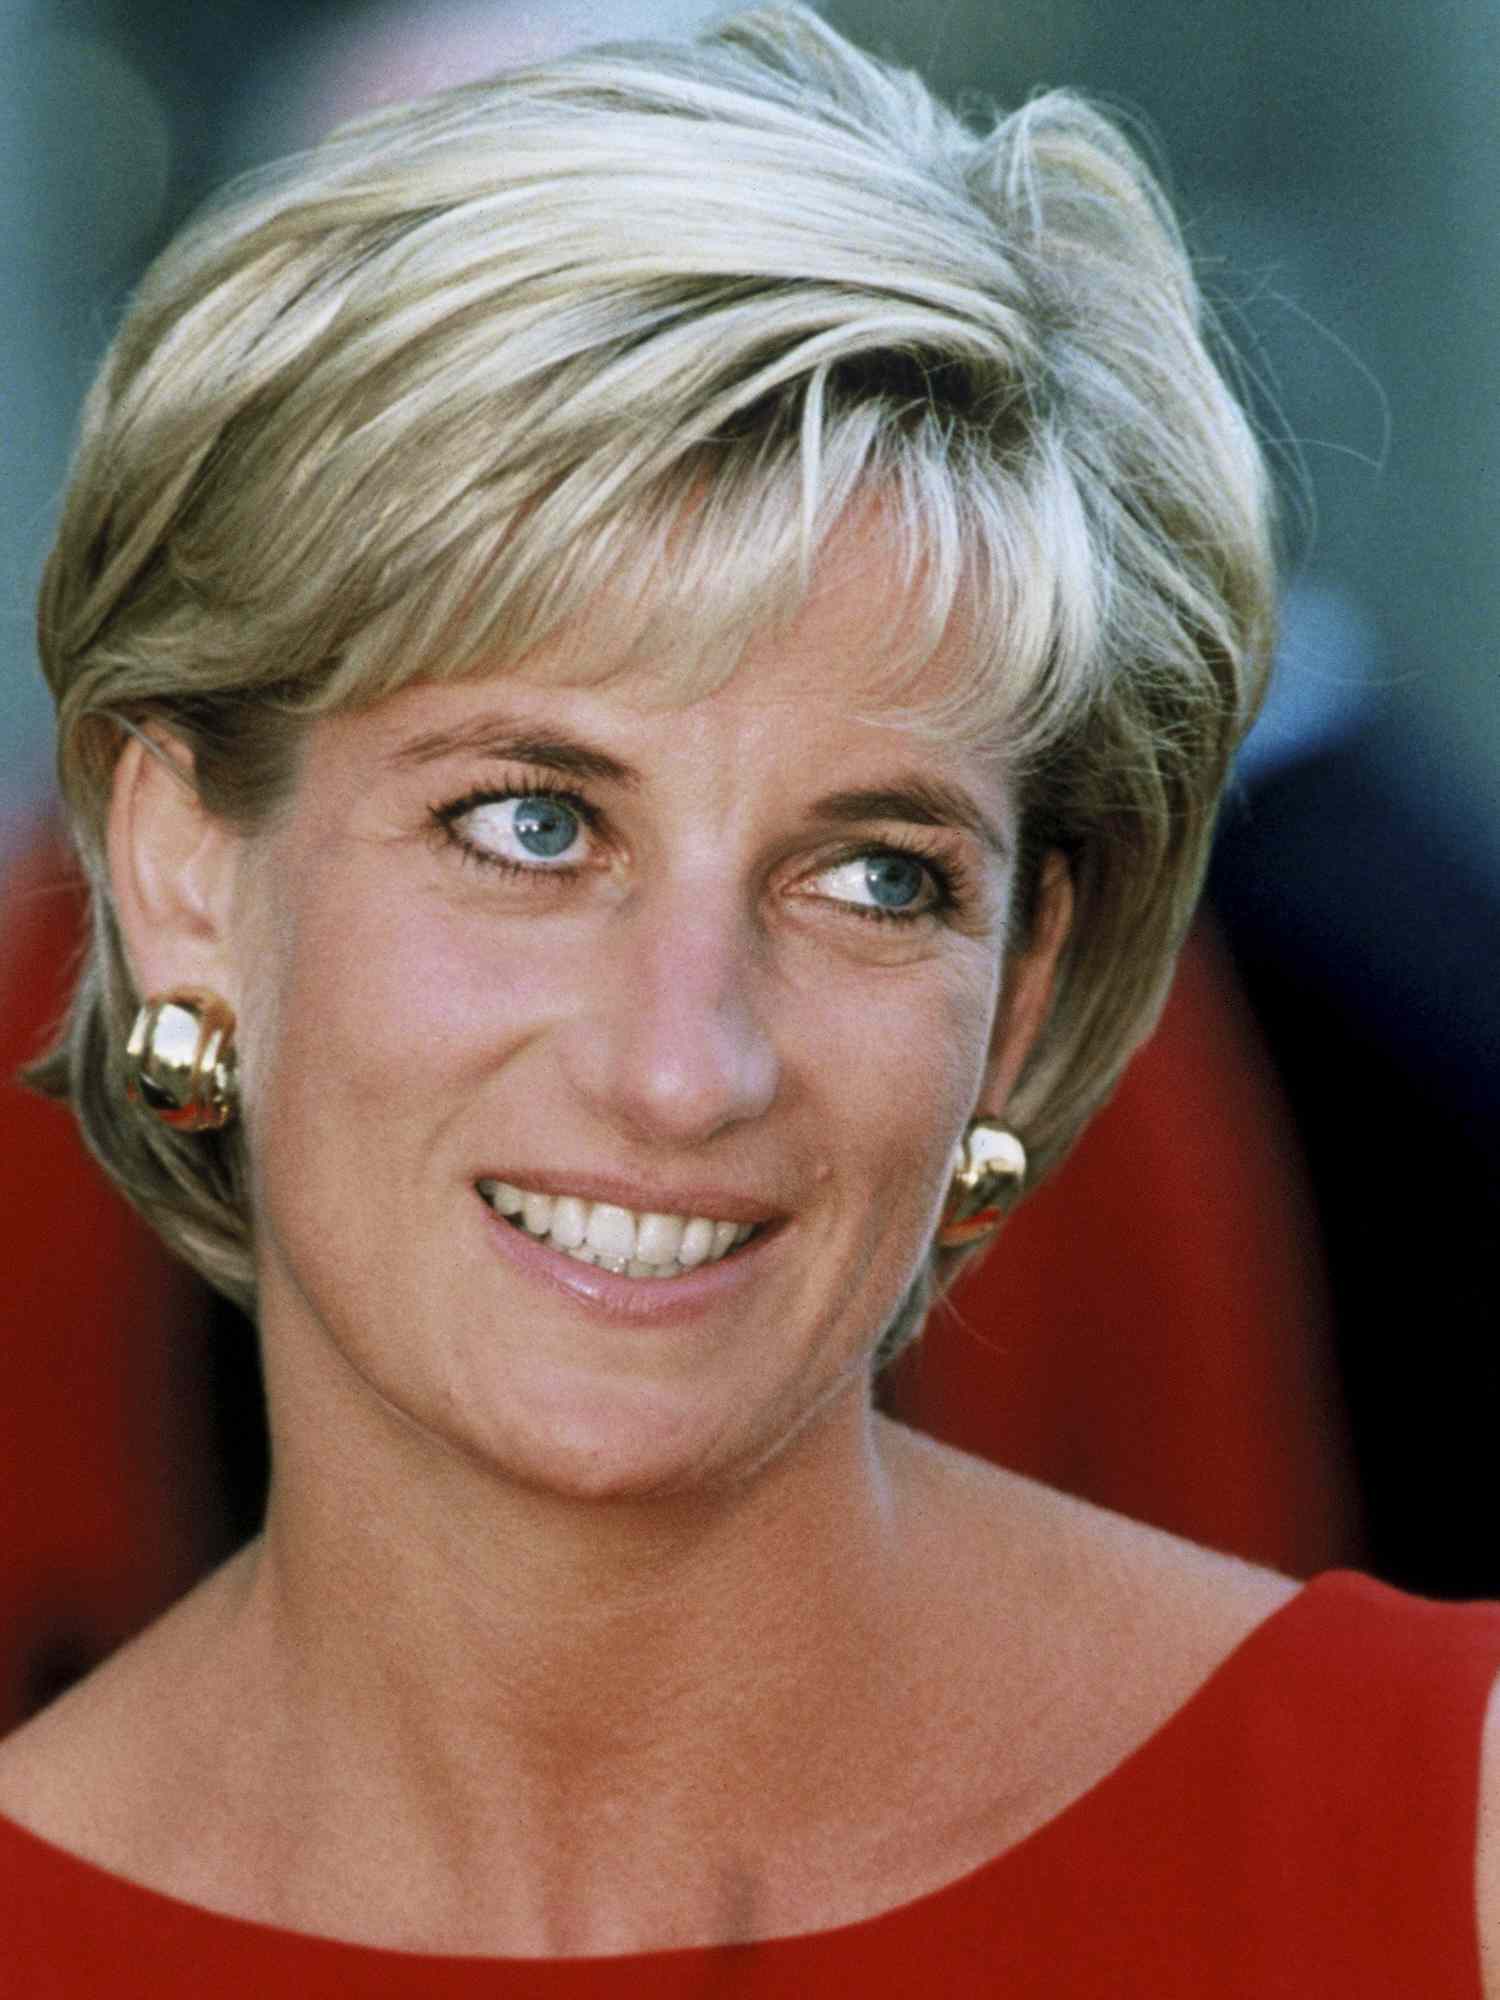 Princess Diana with a long pixie cut with highlights, gold hoop earrings, and a red dress